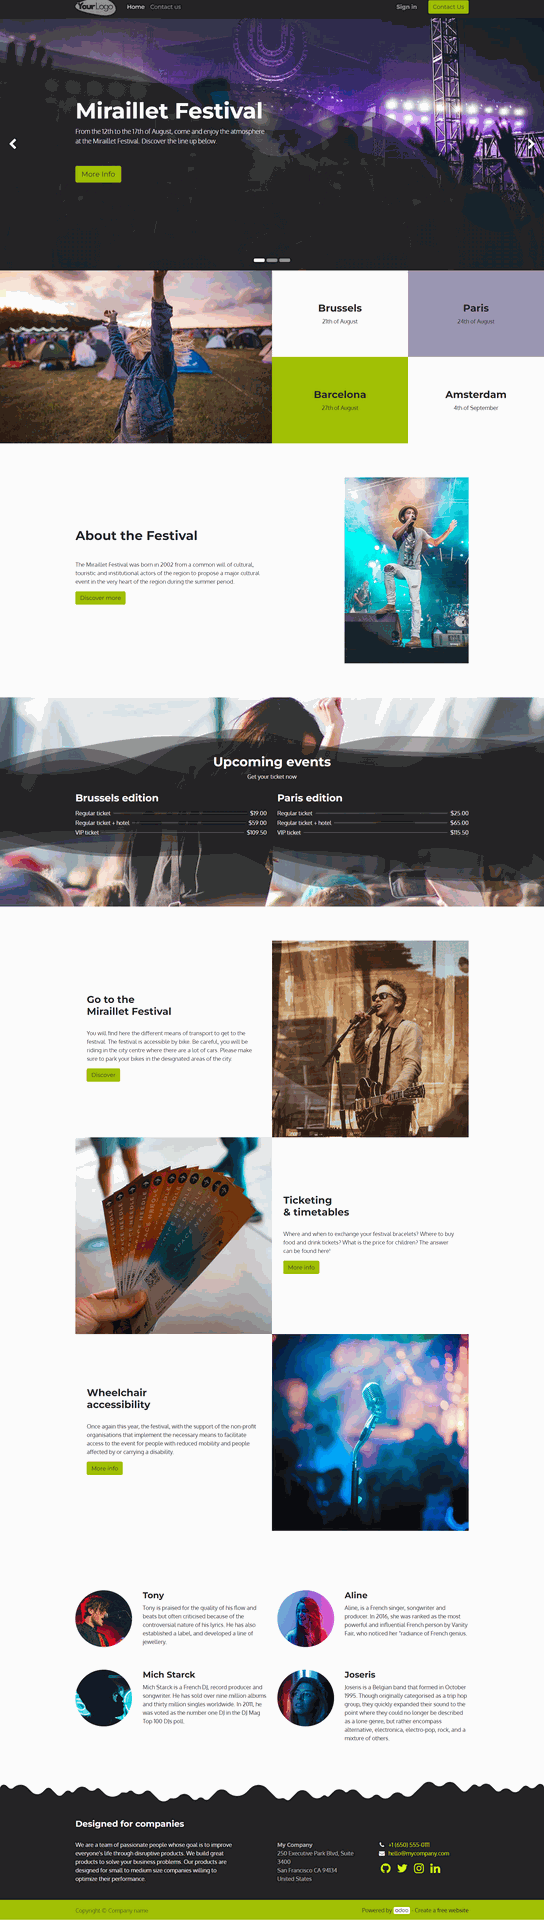 Retail Theme: Band, Musics, Sound, Concerts, Artists, Records, Event, Food, Stores